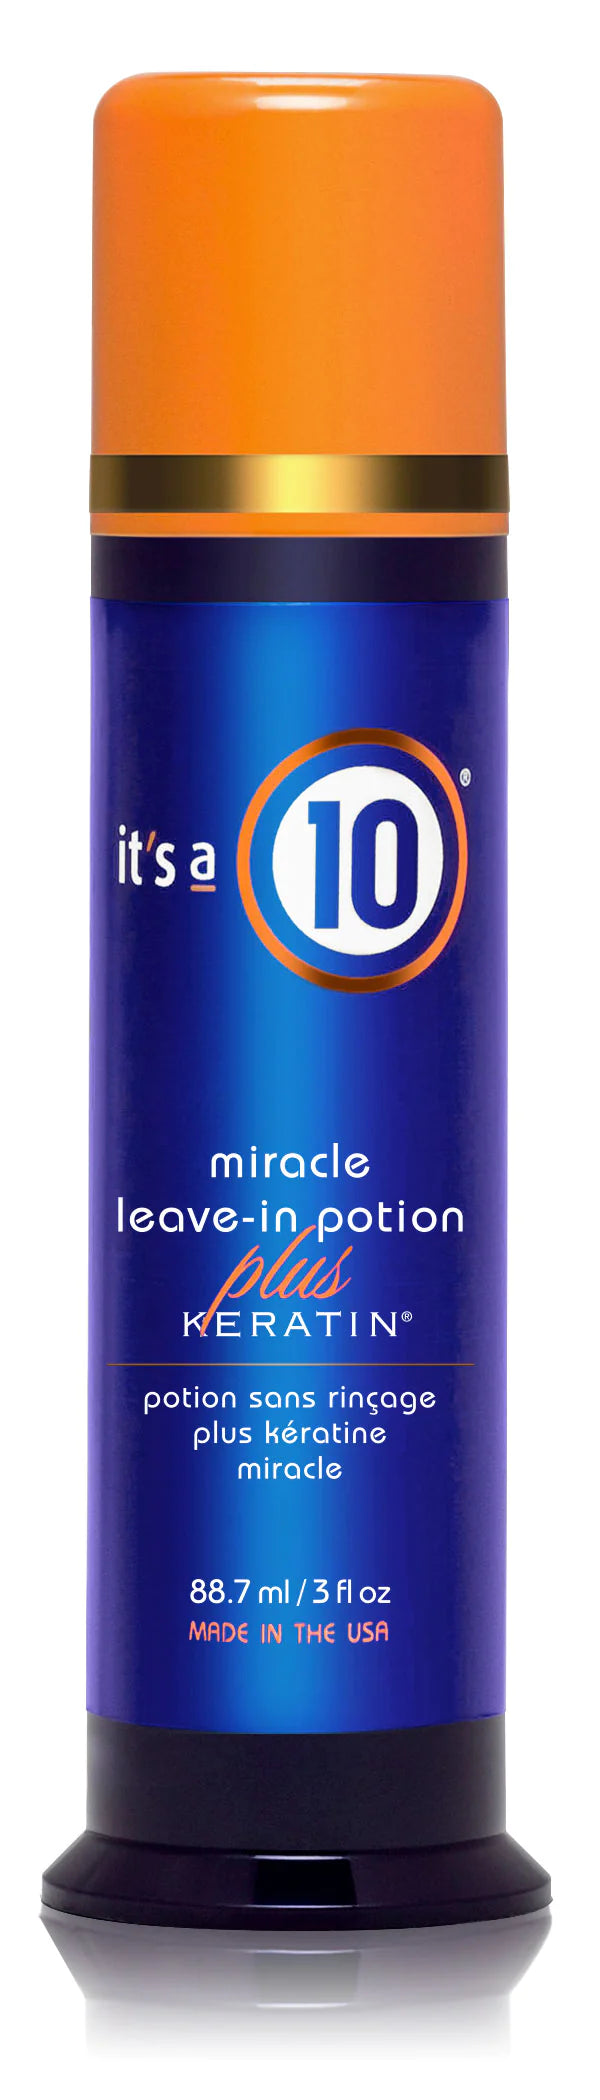 IT'S A 10 MIRACLE LEAVE-IN CONDITIONER POTION PLUS KERATIN